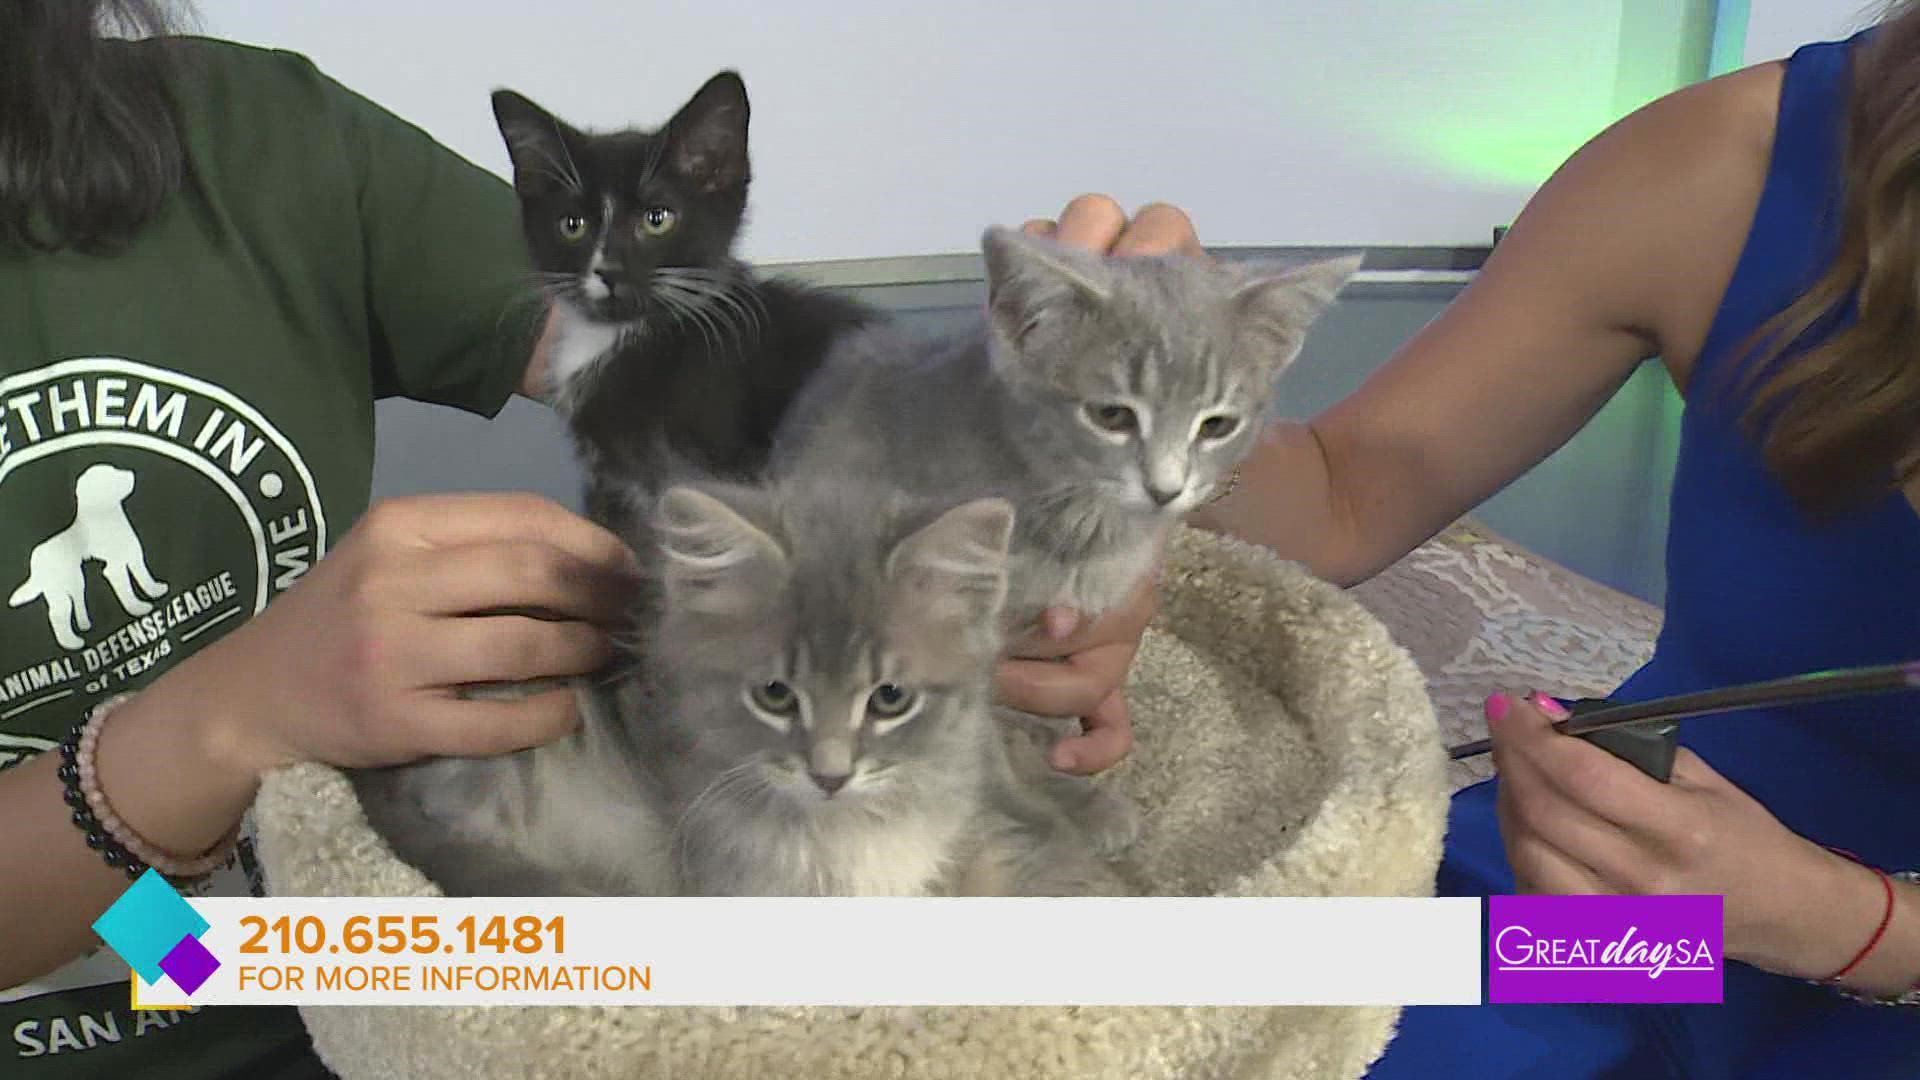 Animal Defense League is looking for more fosters for their kittens